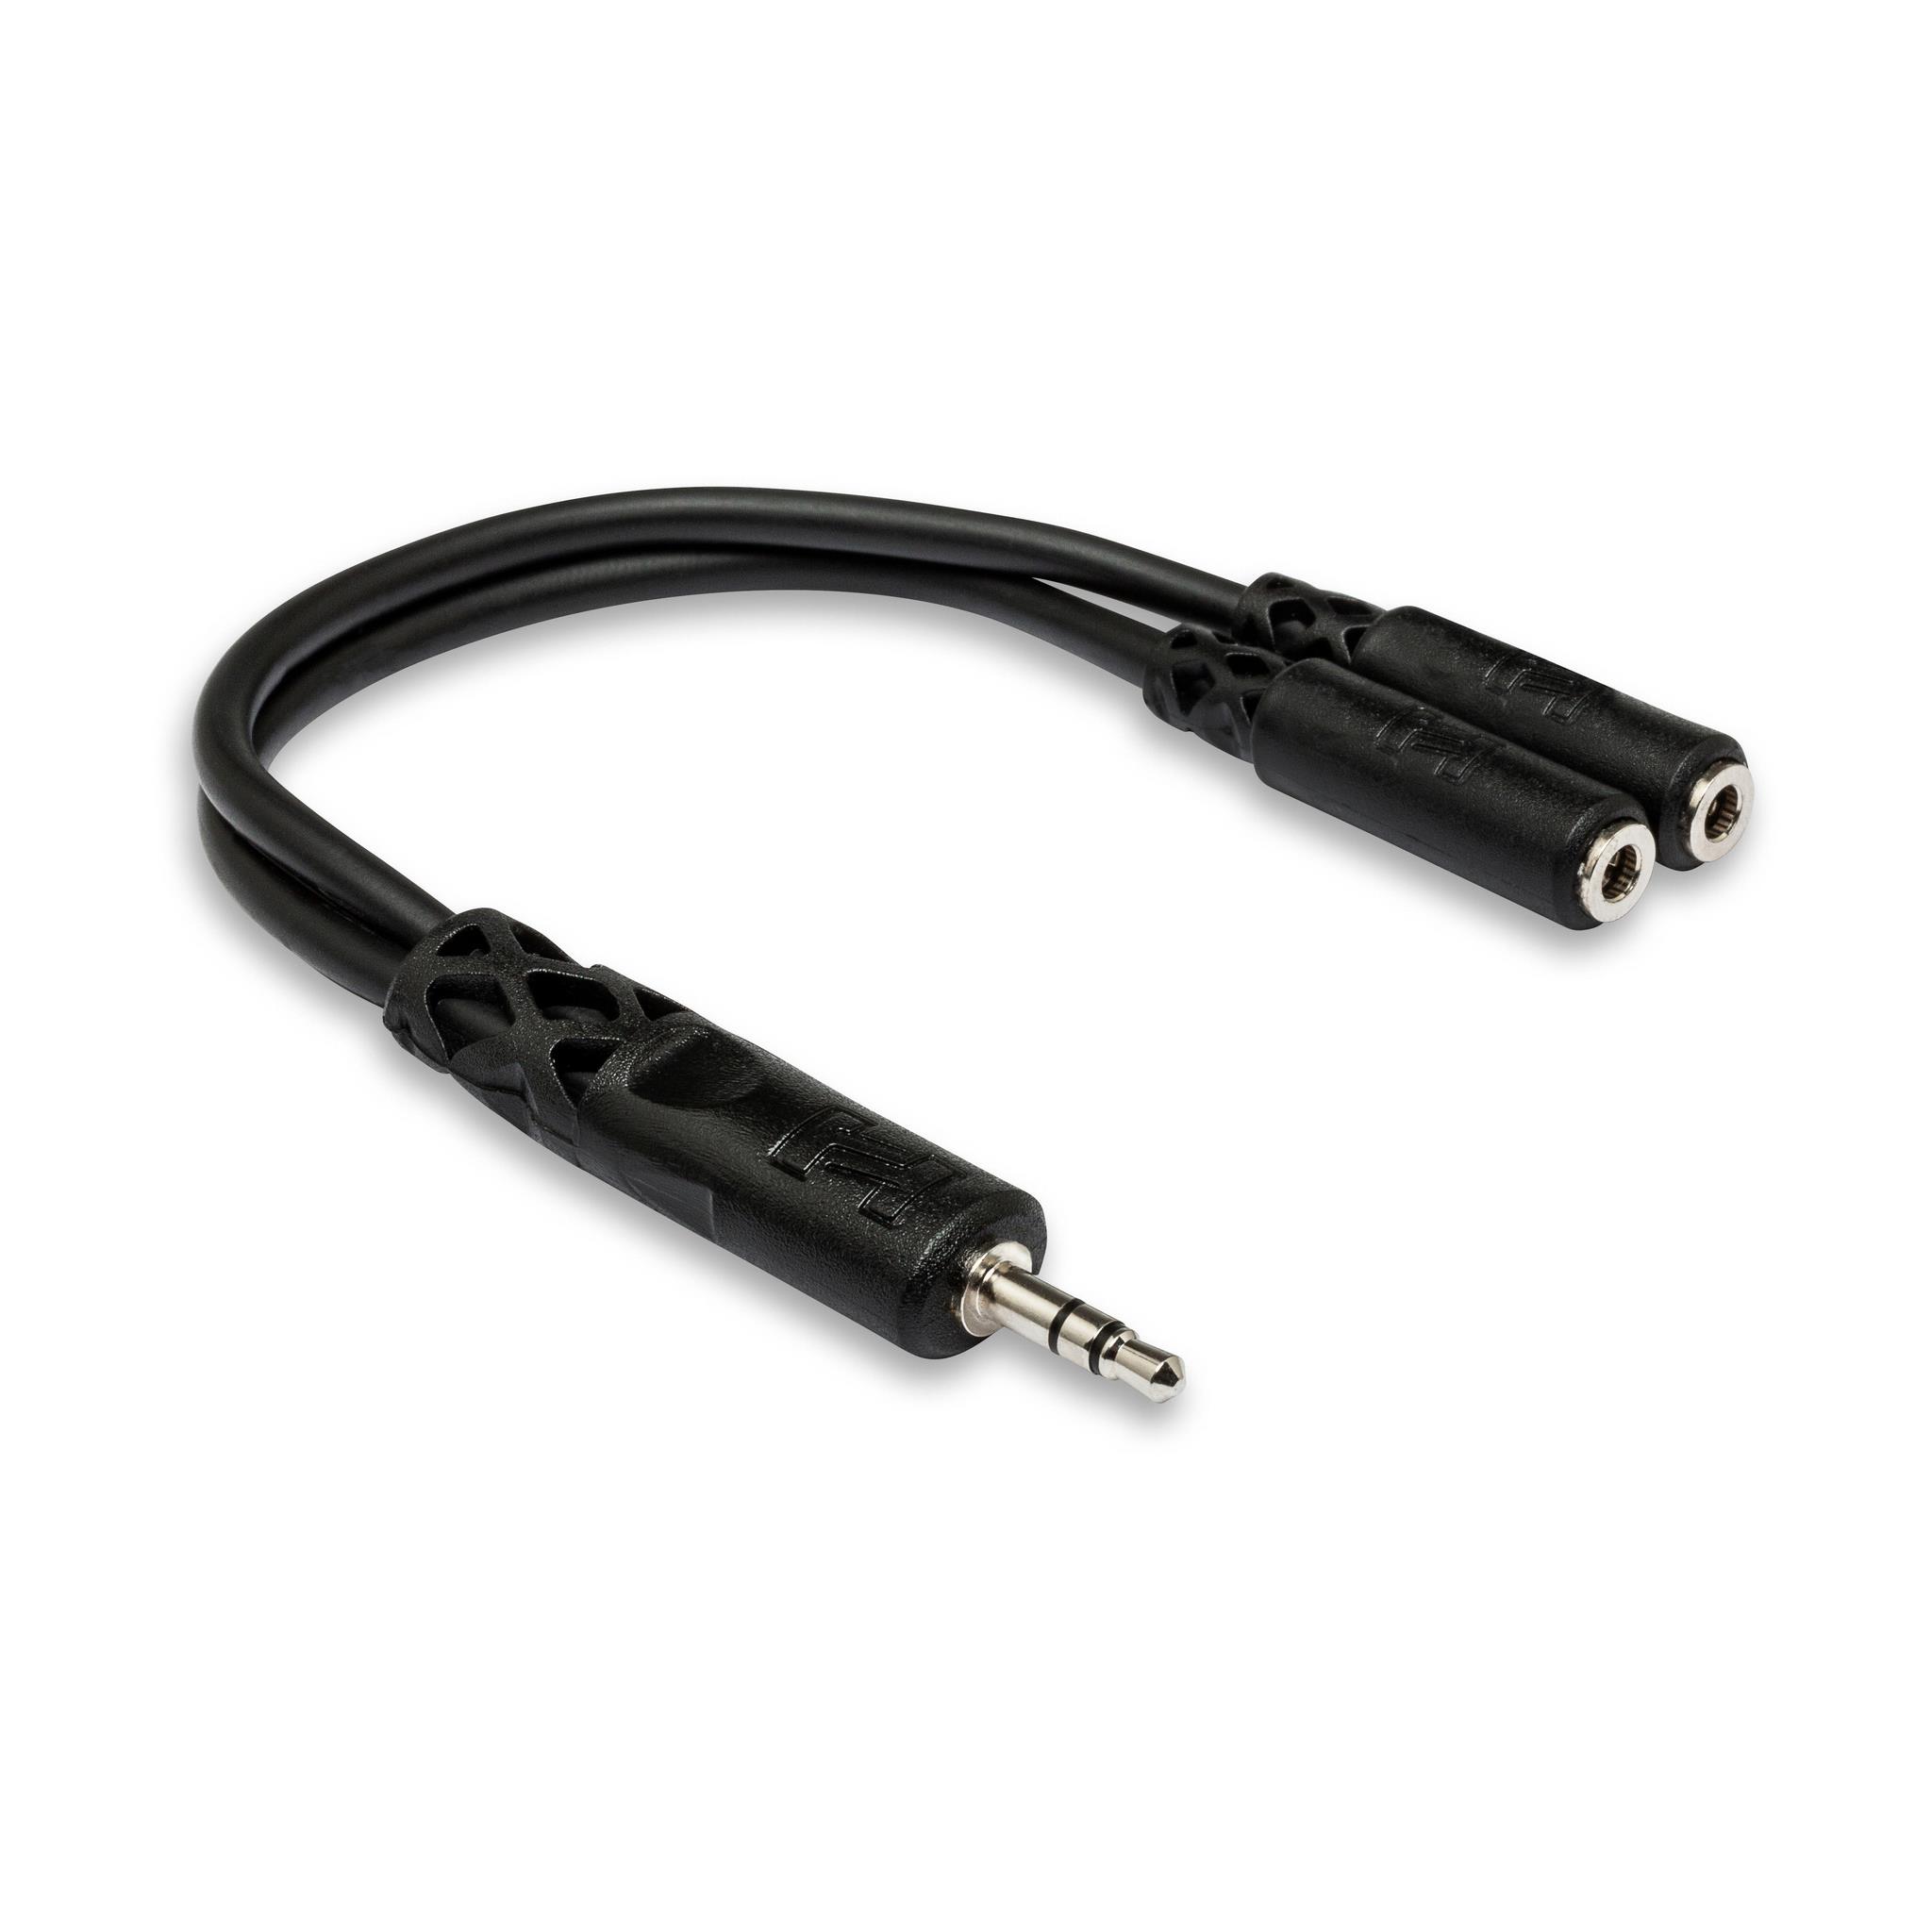 Hosa 3.5 mm TRS Y Cable 1 male to 2 female